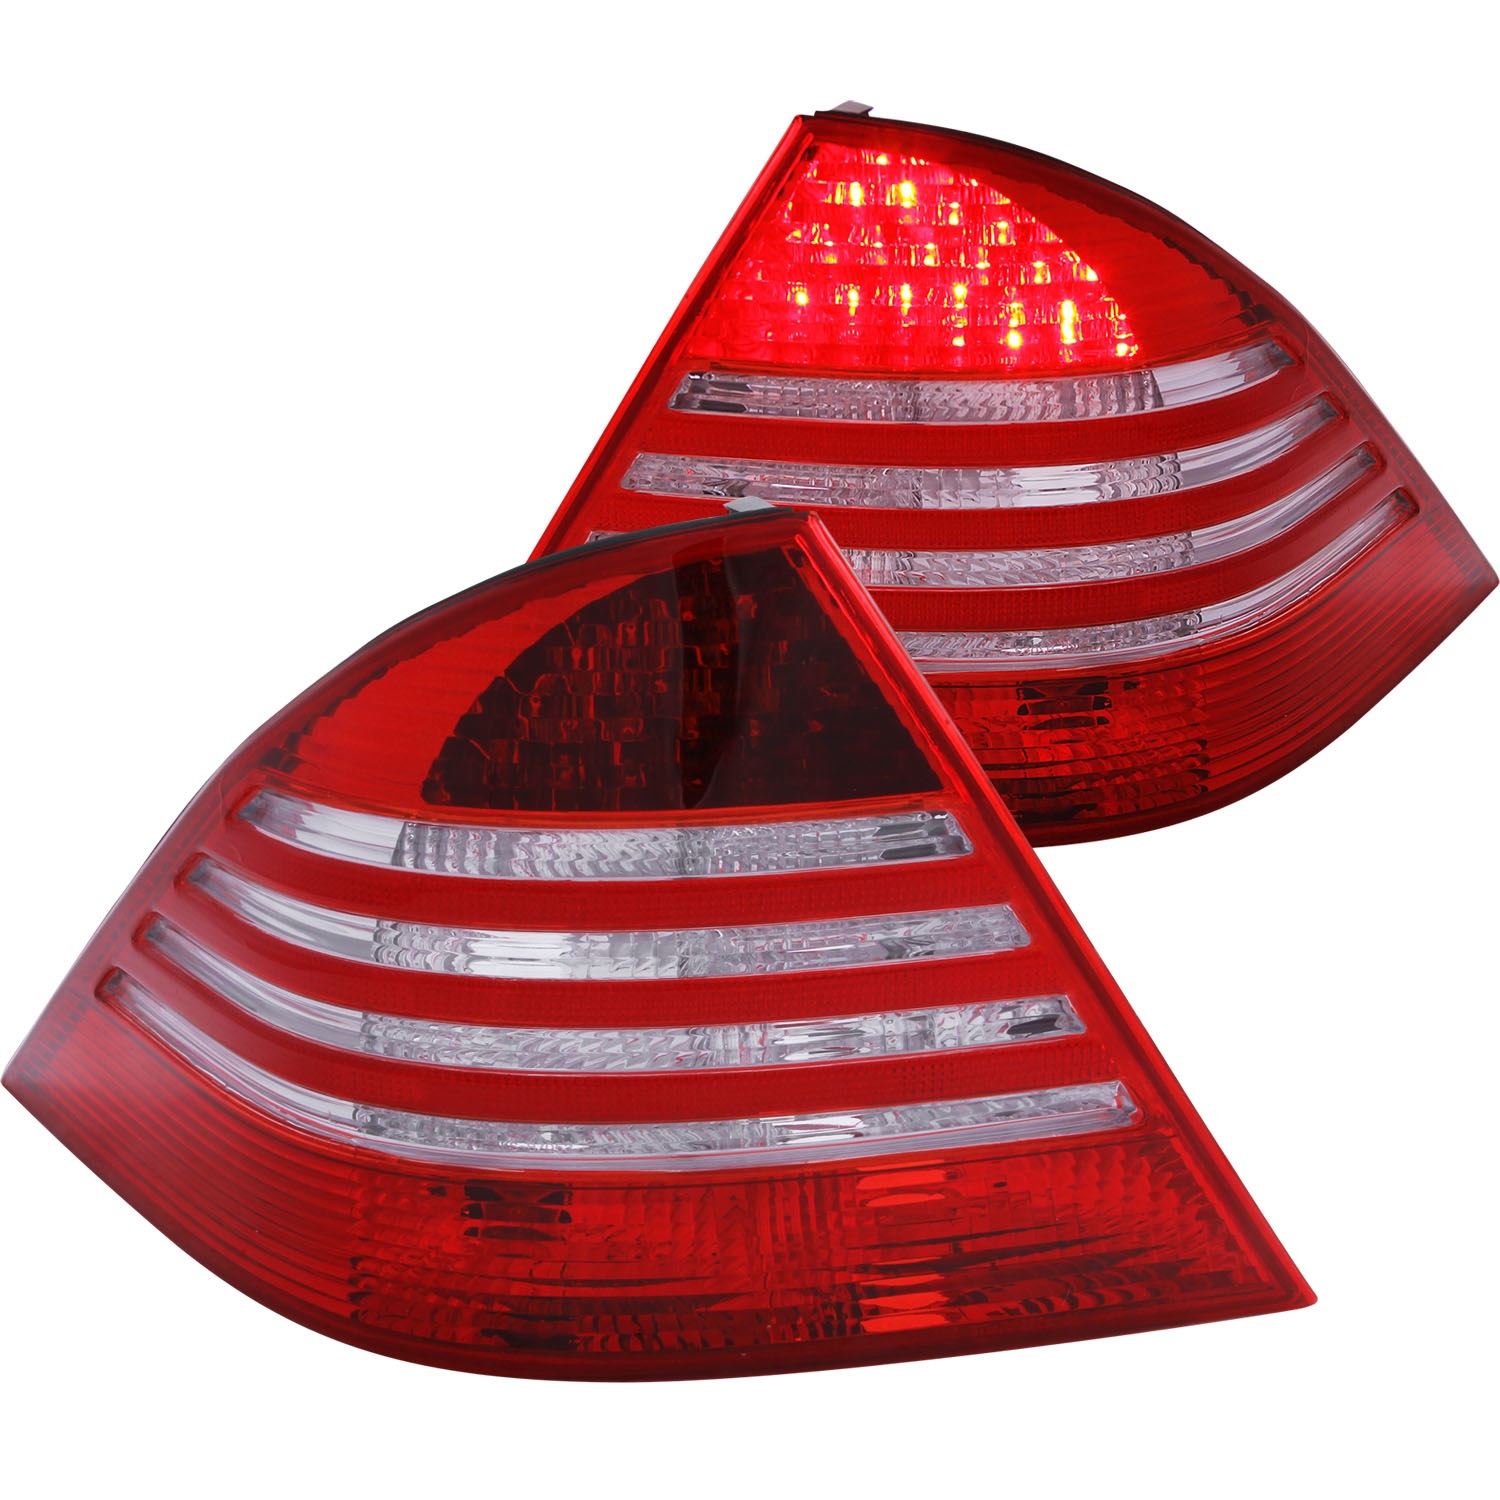 Anzo USA Anzo USA 321055 Tail Light Assembly Fits 00-05 S430 S500 S55 AMG S600